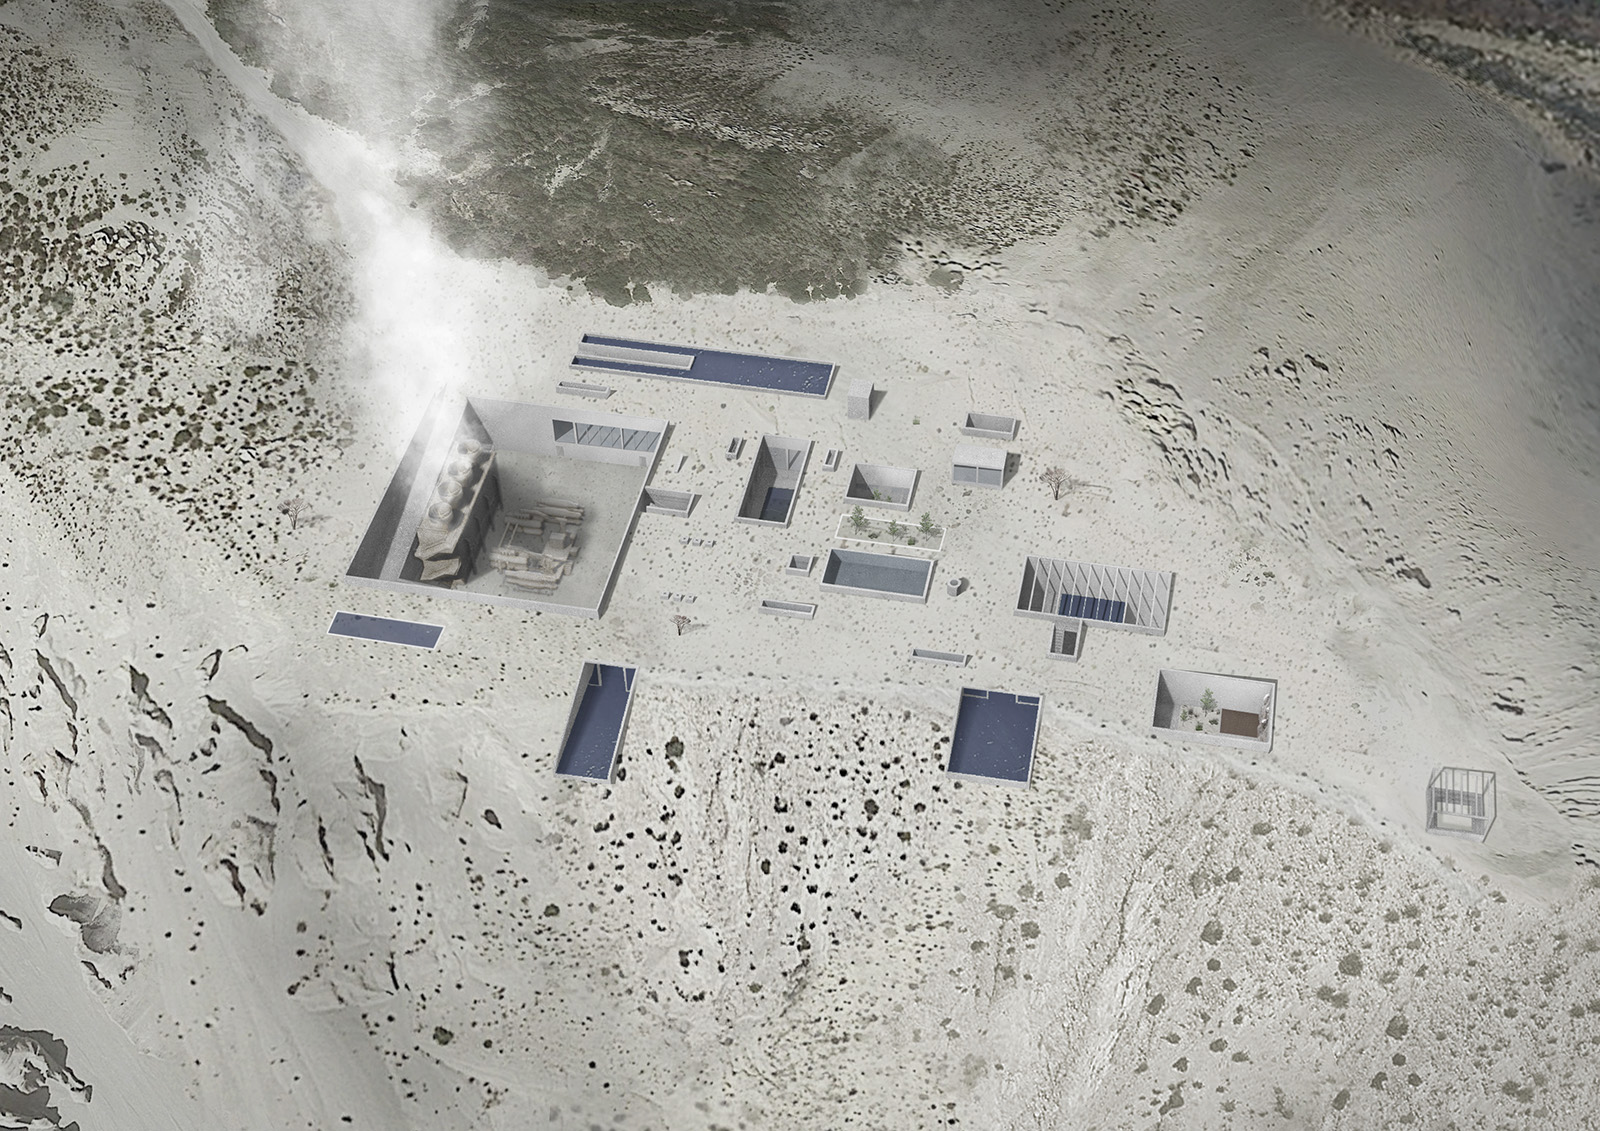 Archisearch Re-mining Giali: a new scenario for the manufactured landscape _ baths and a power production facility | Diploma thesis project by Dimitrios Mitsimponas